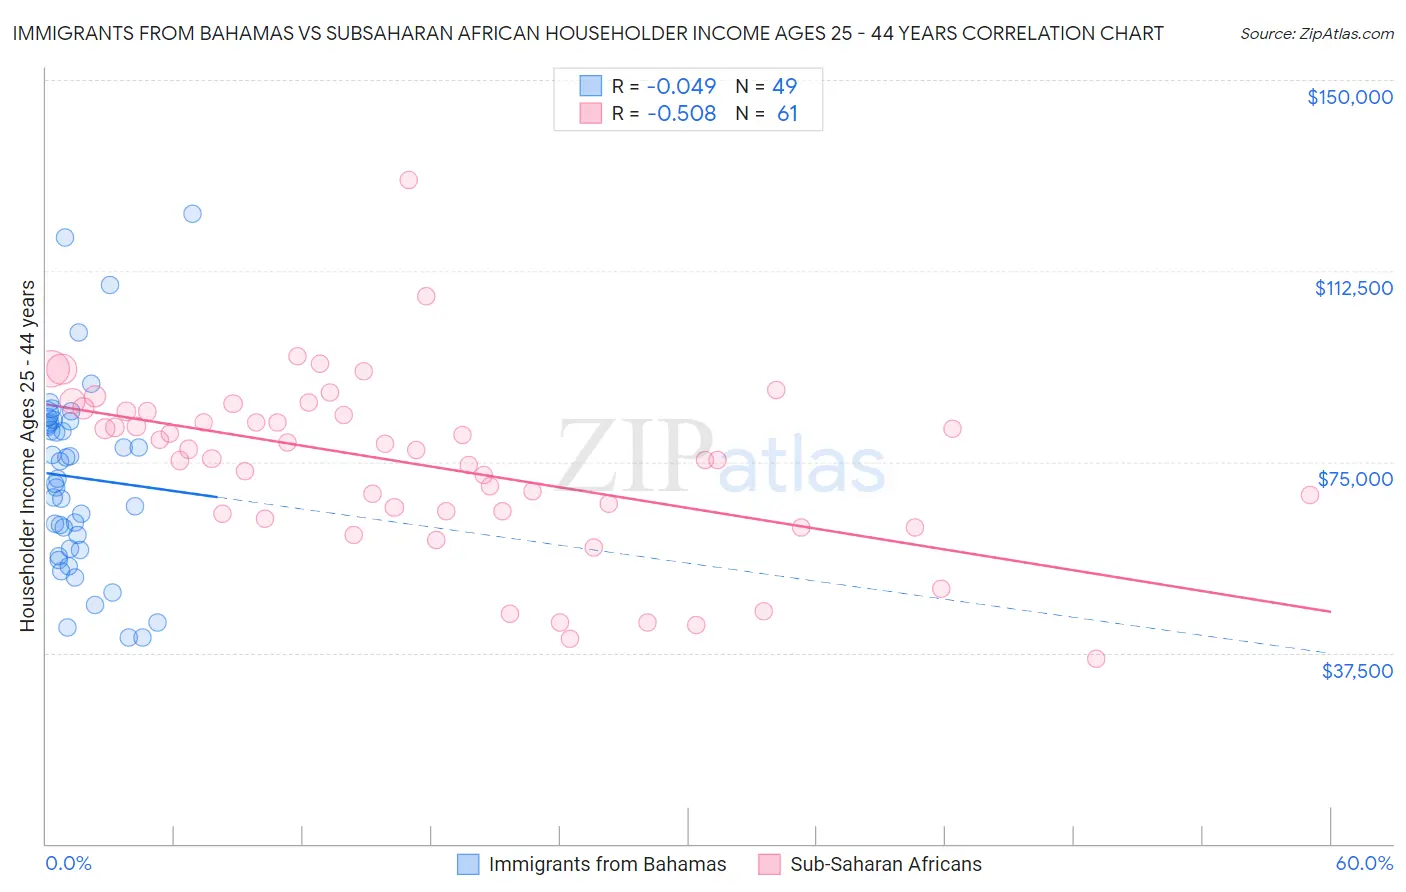 Immigrants from Bahamas vs Subsaharan African Householder Income Ages 25 - 44 years